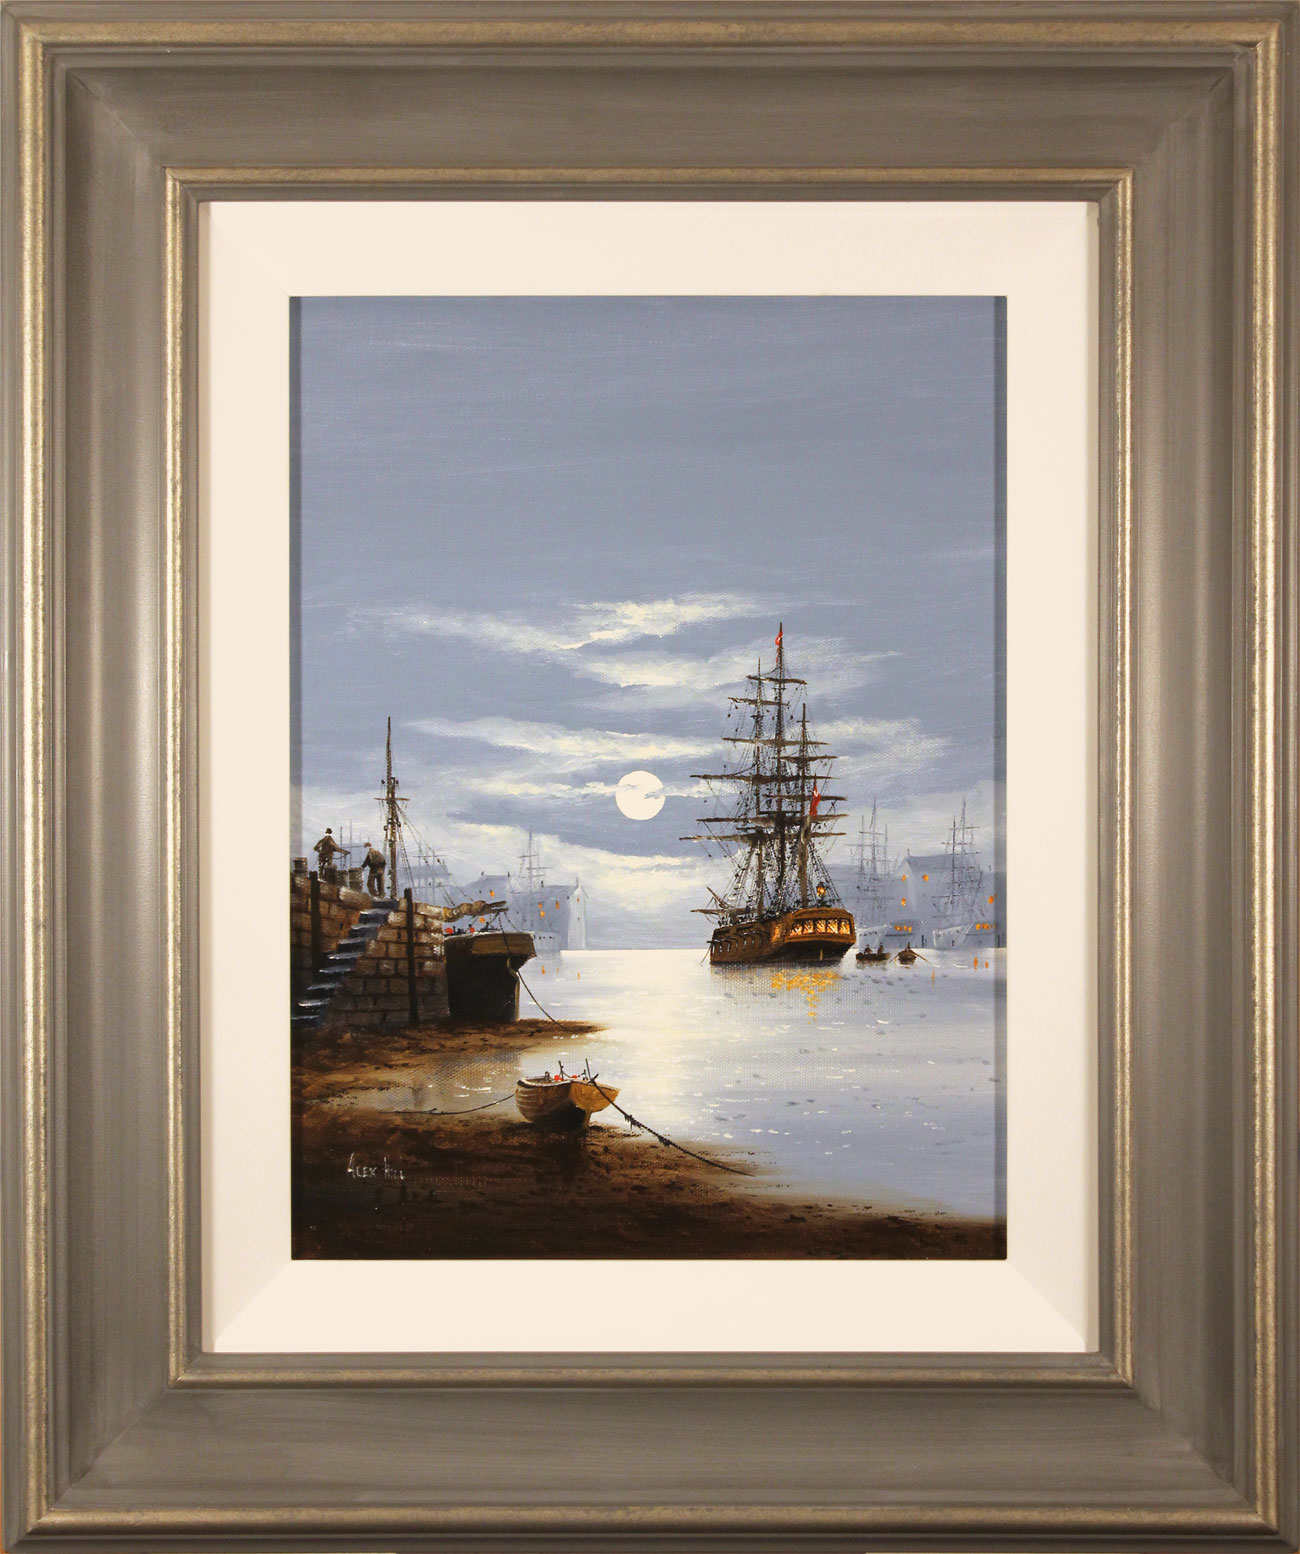 Alex Hill, Original oil painting on canvas, Night at the Docks